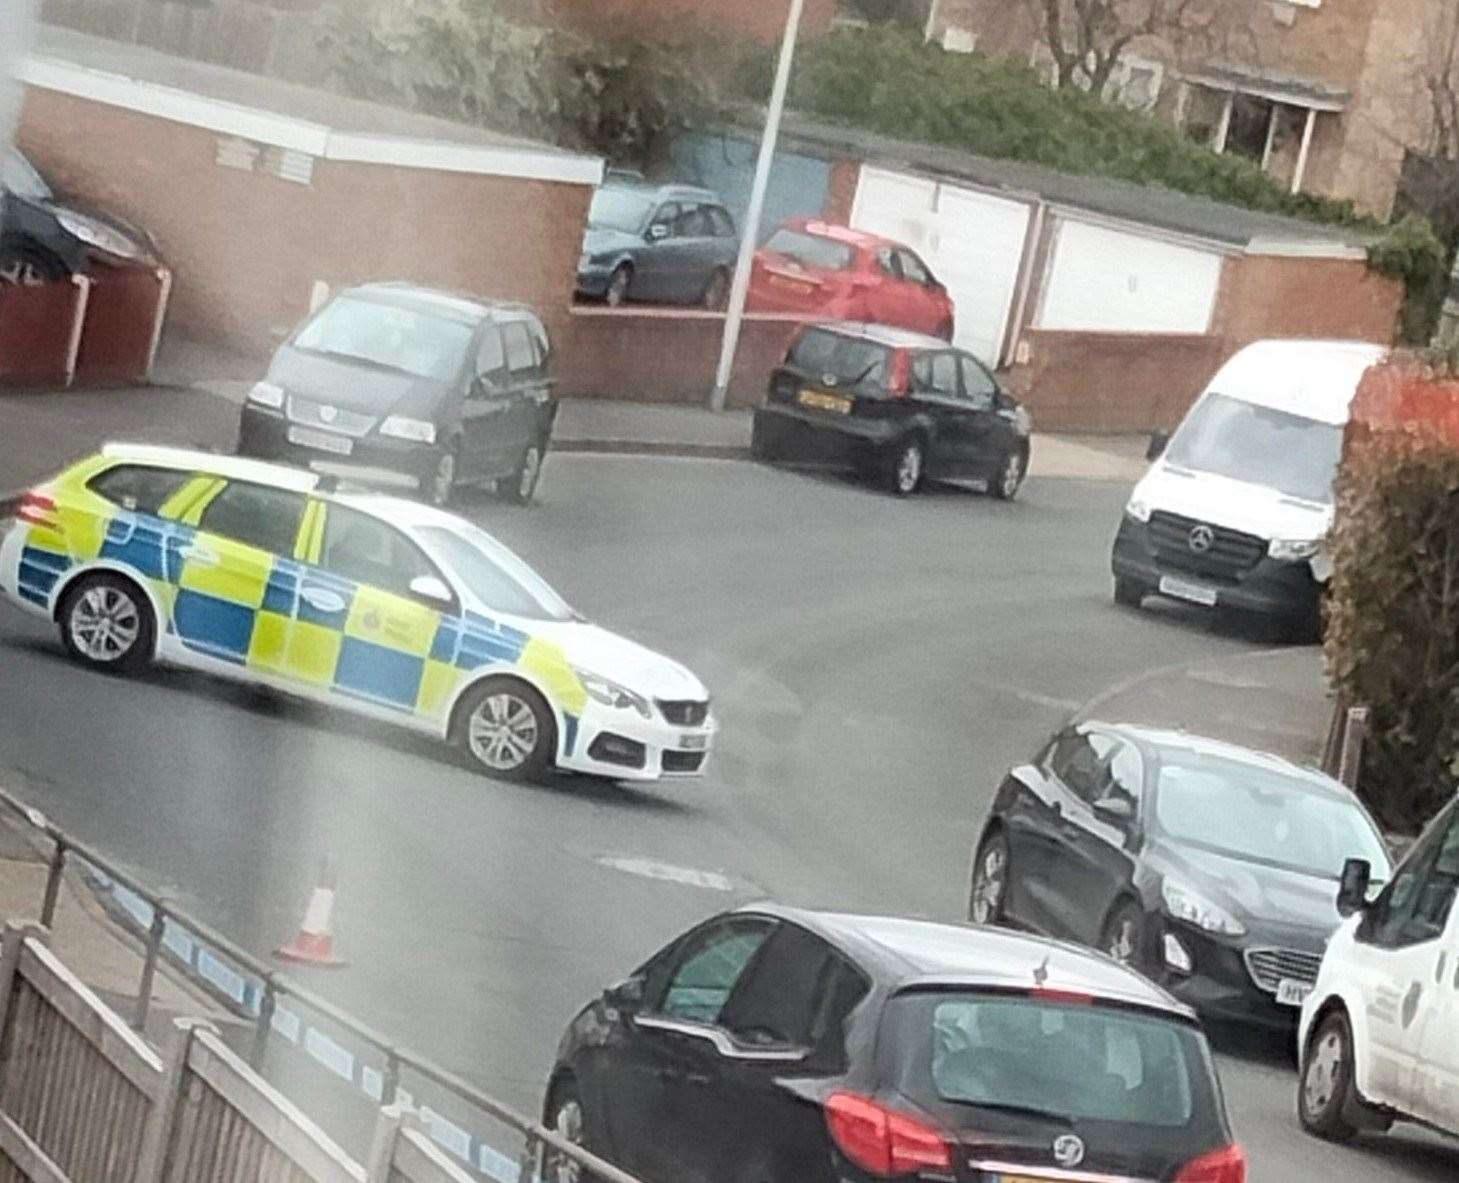 Police have cordoned off Kingfisher Drive, Walderslade